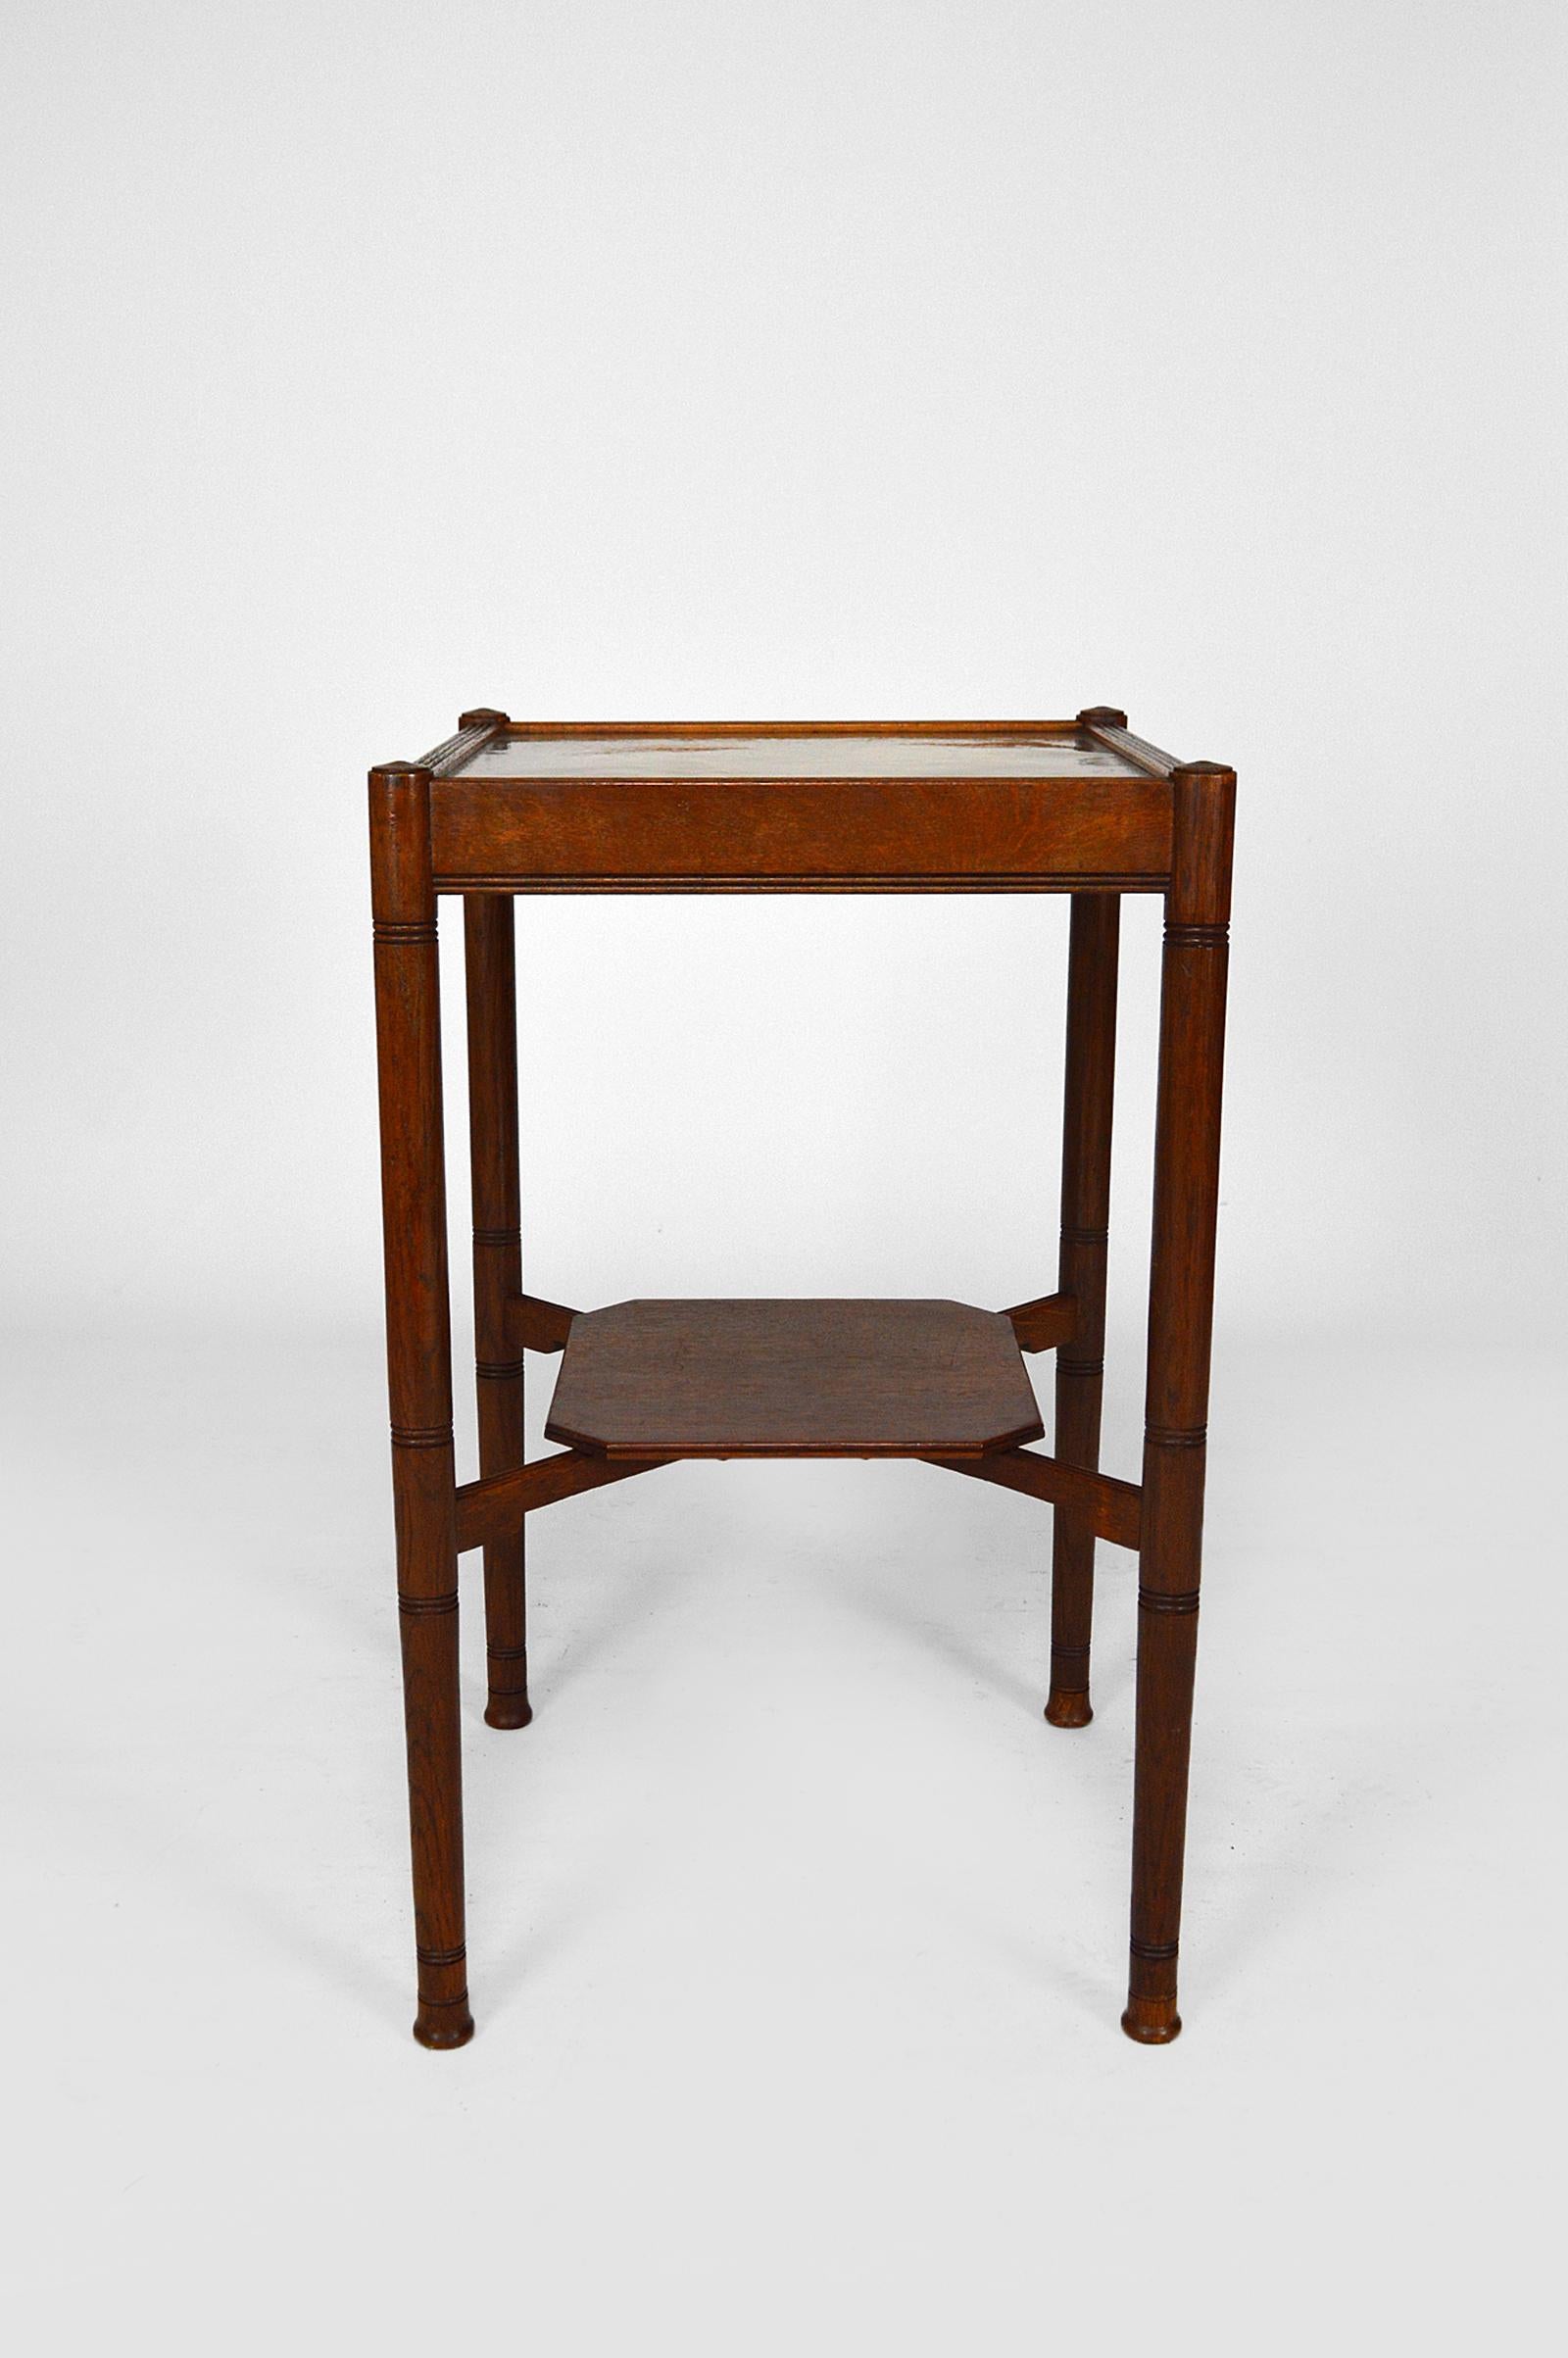 Elegant side table / pedestal table in Arts & Craft style.
Carved oak structure. Square hammered brass tray.

United Kingdom, mid-late 19th century.
Style Arts & Crafts / Aesthetic Movement.
In the manner of Edward William Godwin (1833-1886),